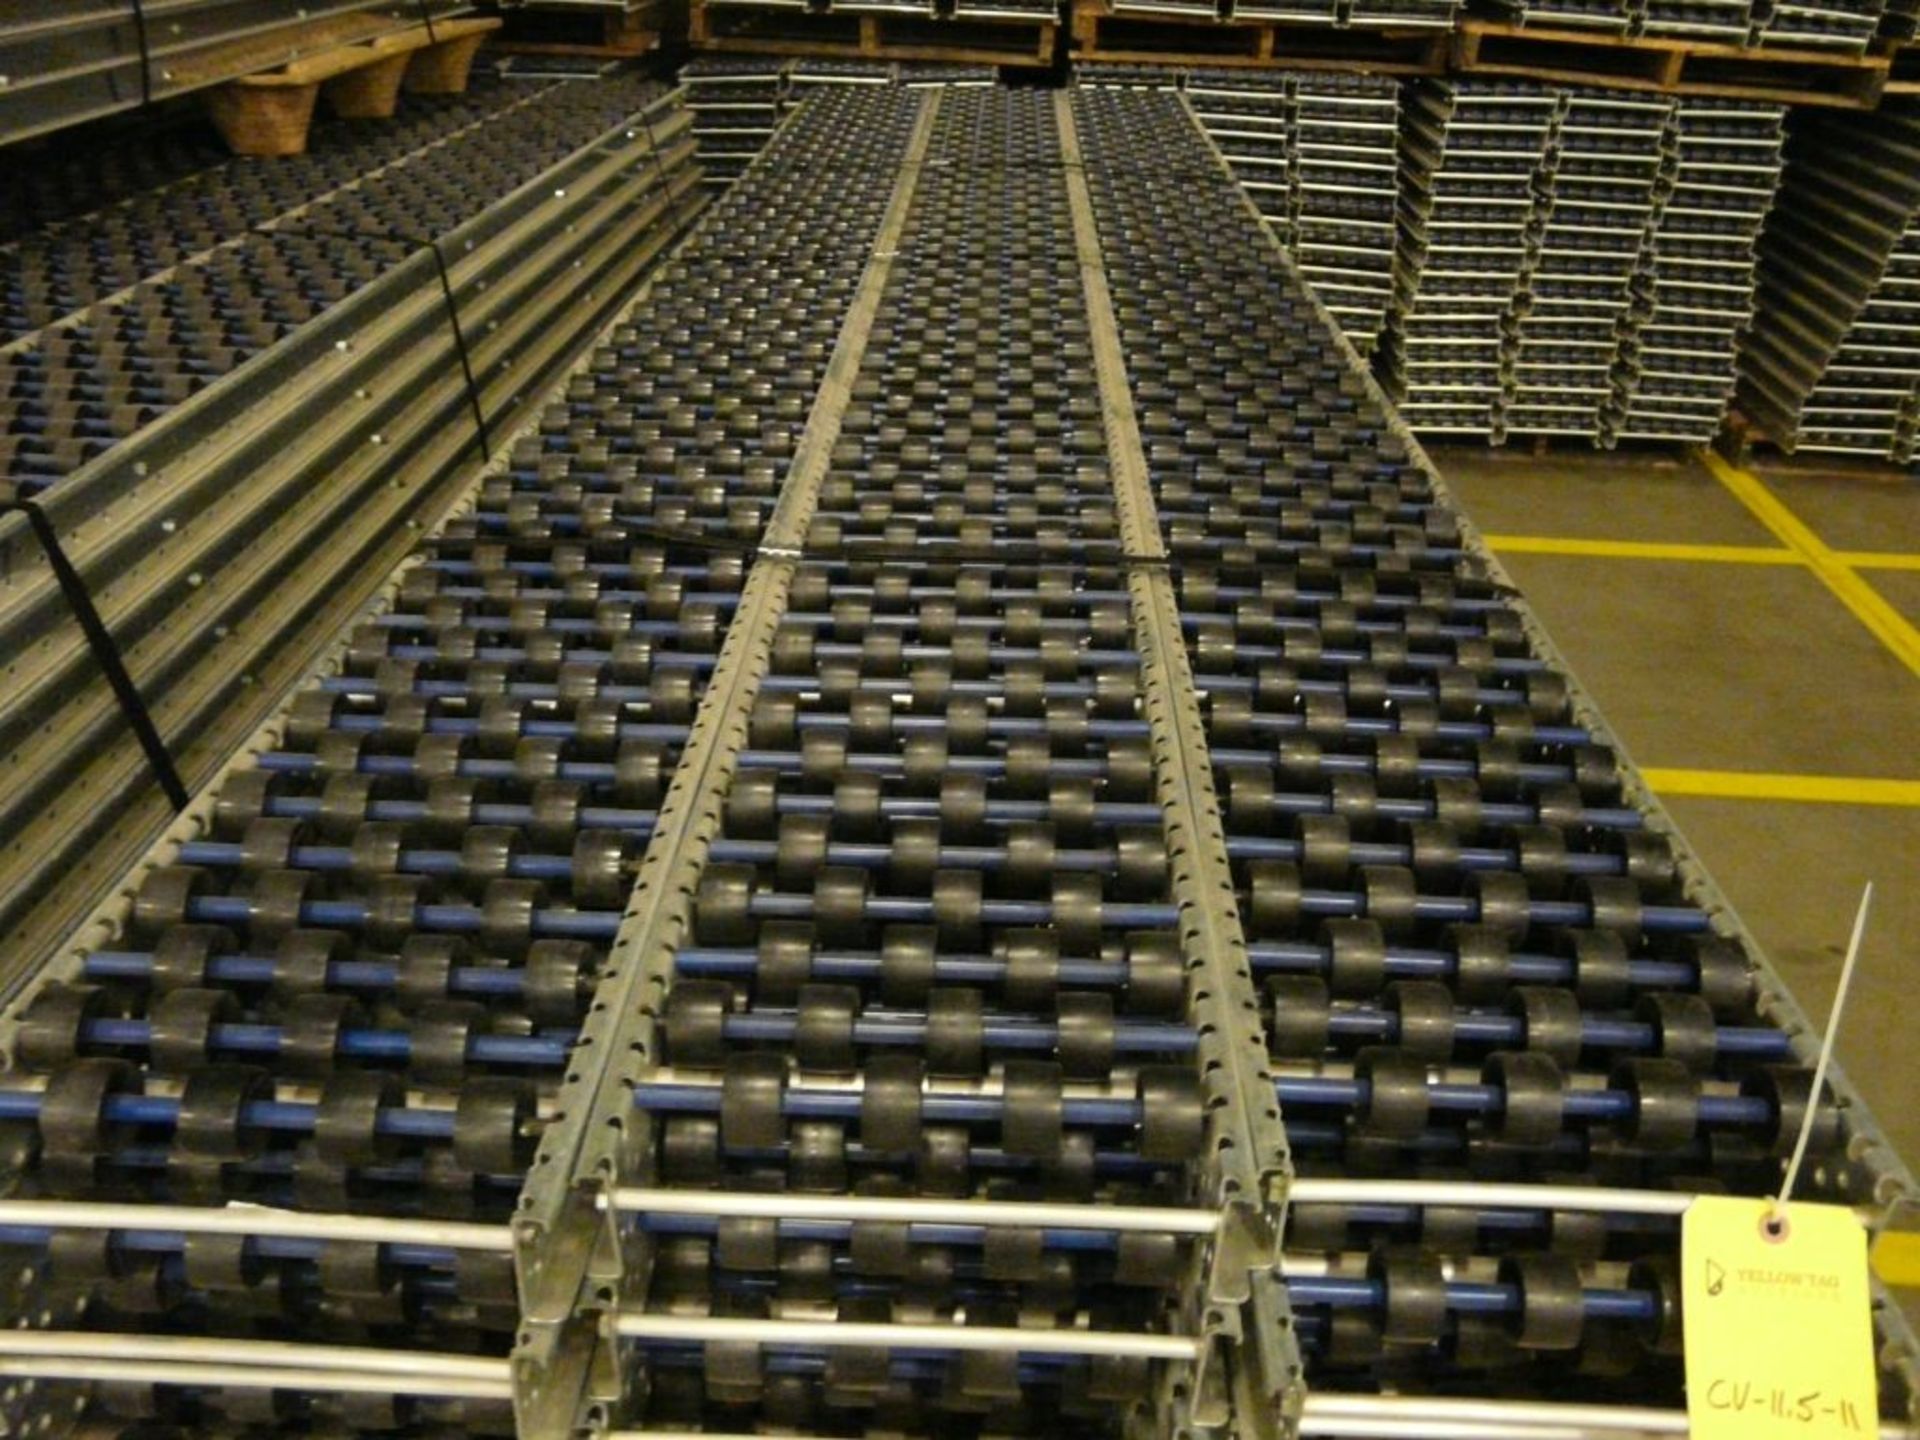 Lot of (90) SpanTrack Wheelbed Carton Flow Conveyors - 11.5'L x 11"W; Tag: 223635 - $30 Lot - Image 3 of 4